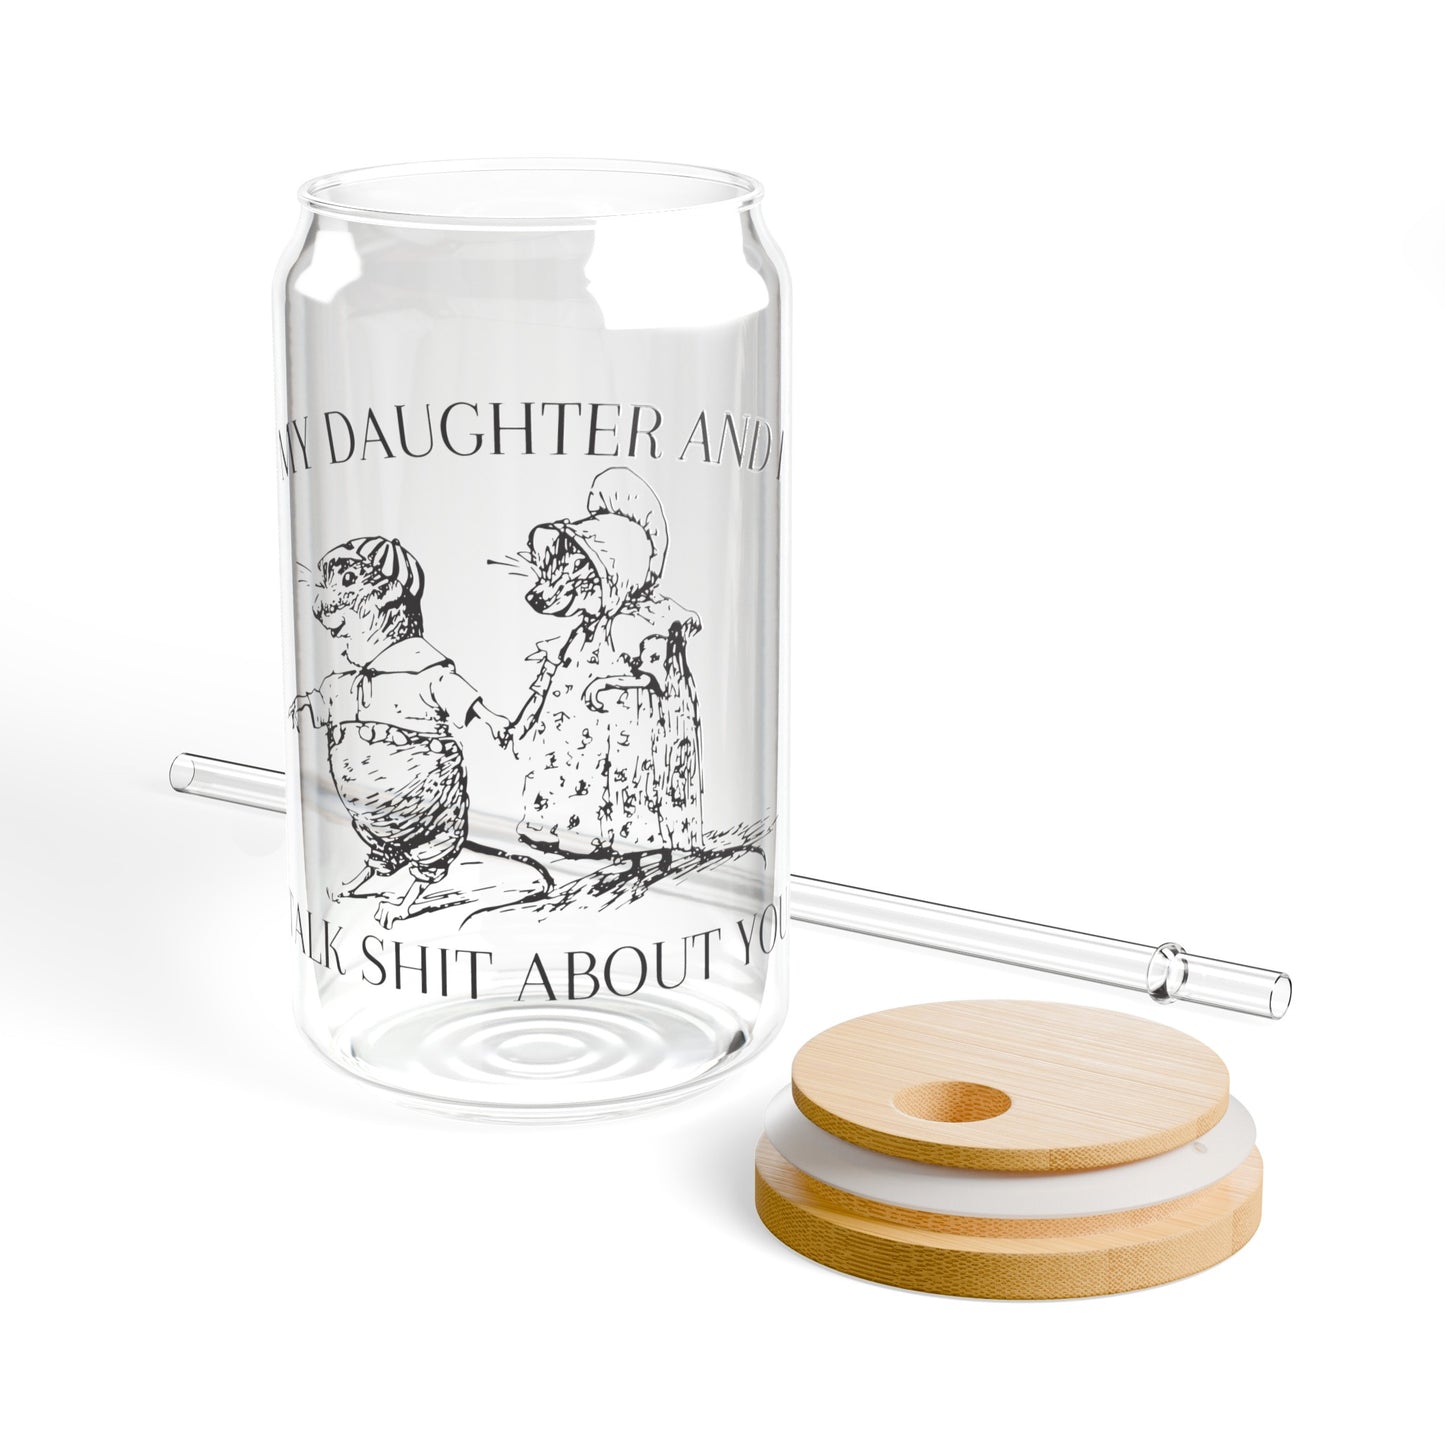 My daughter and I talk shit about you  - Sipper Glass, 16oz